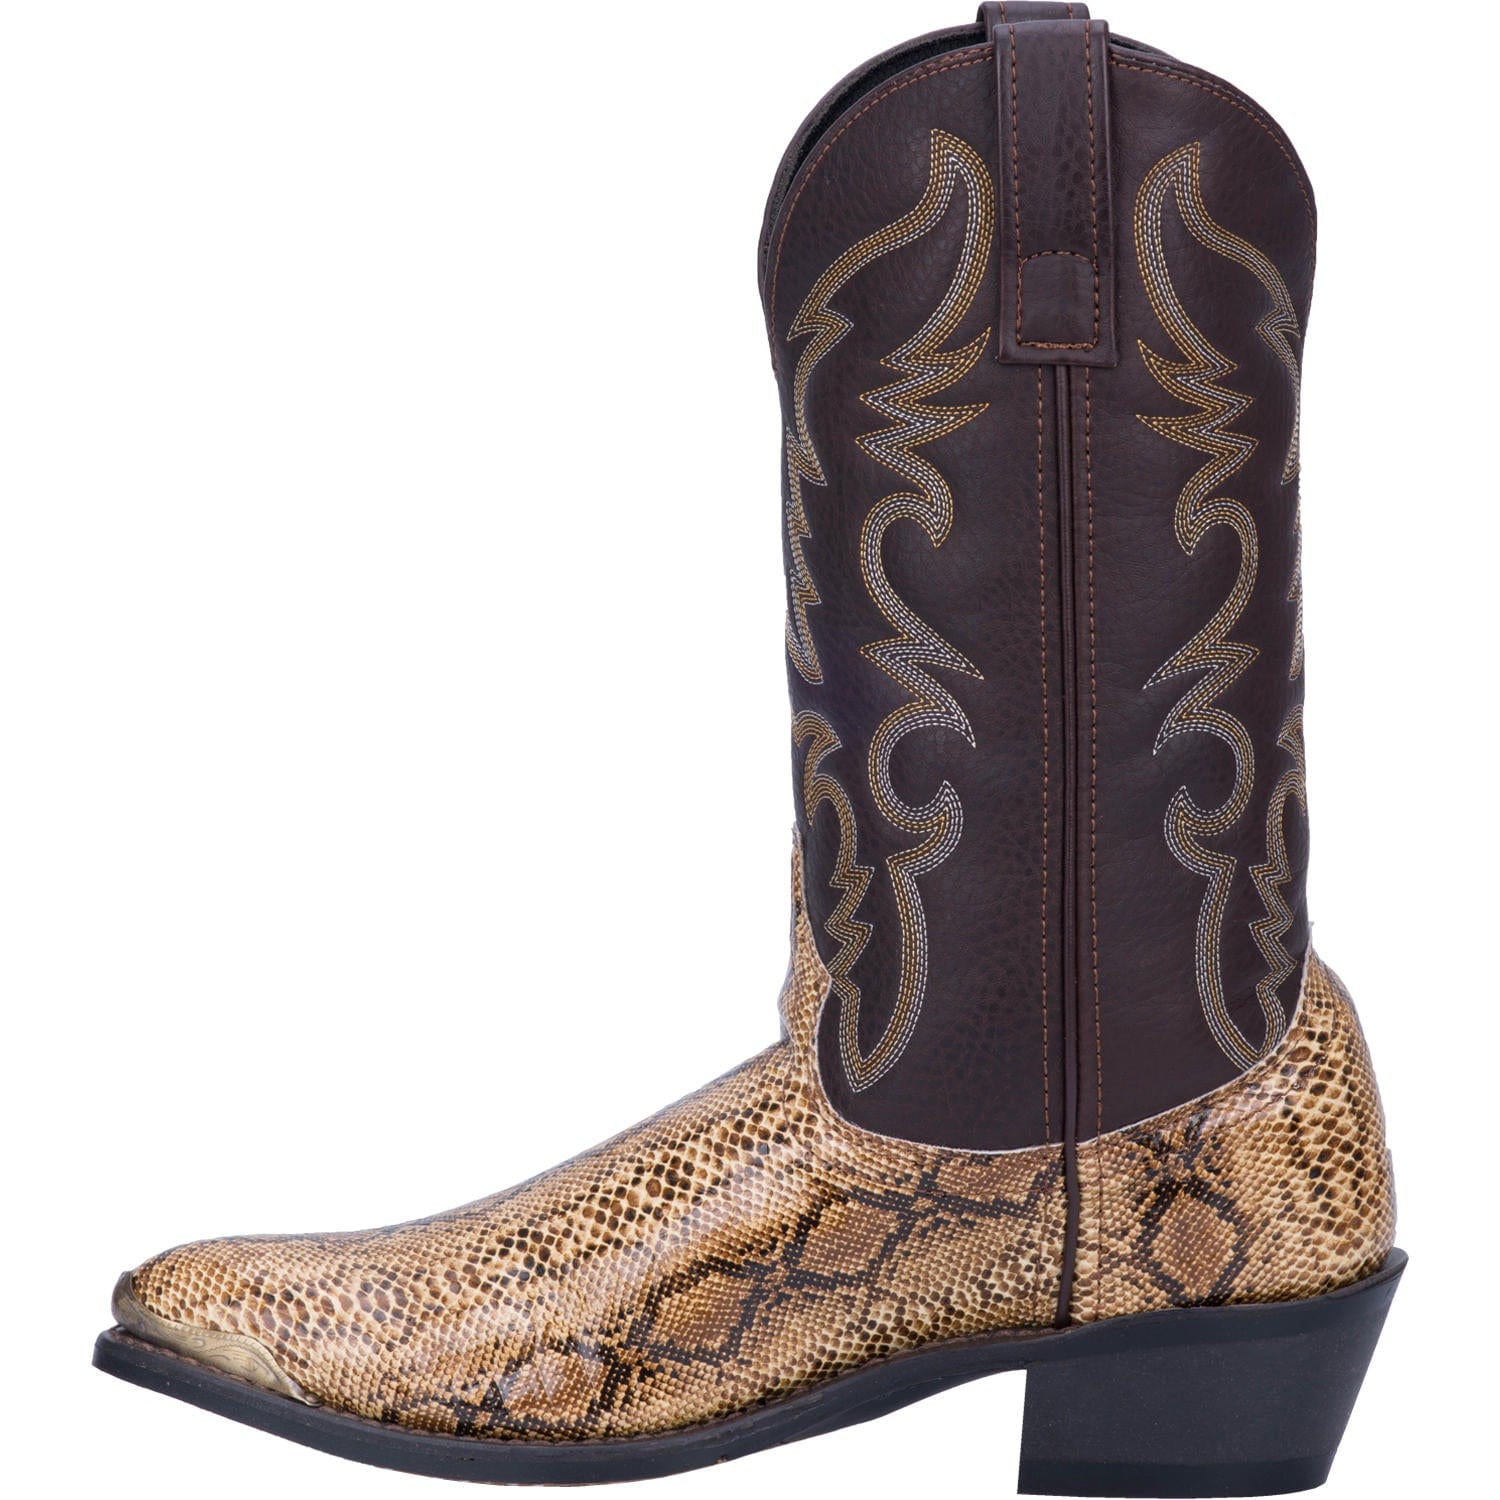 60mm Rosario Lizard Print Leather Boots